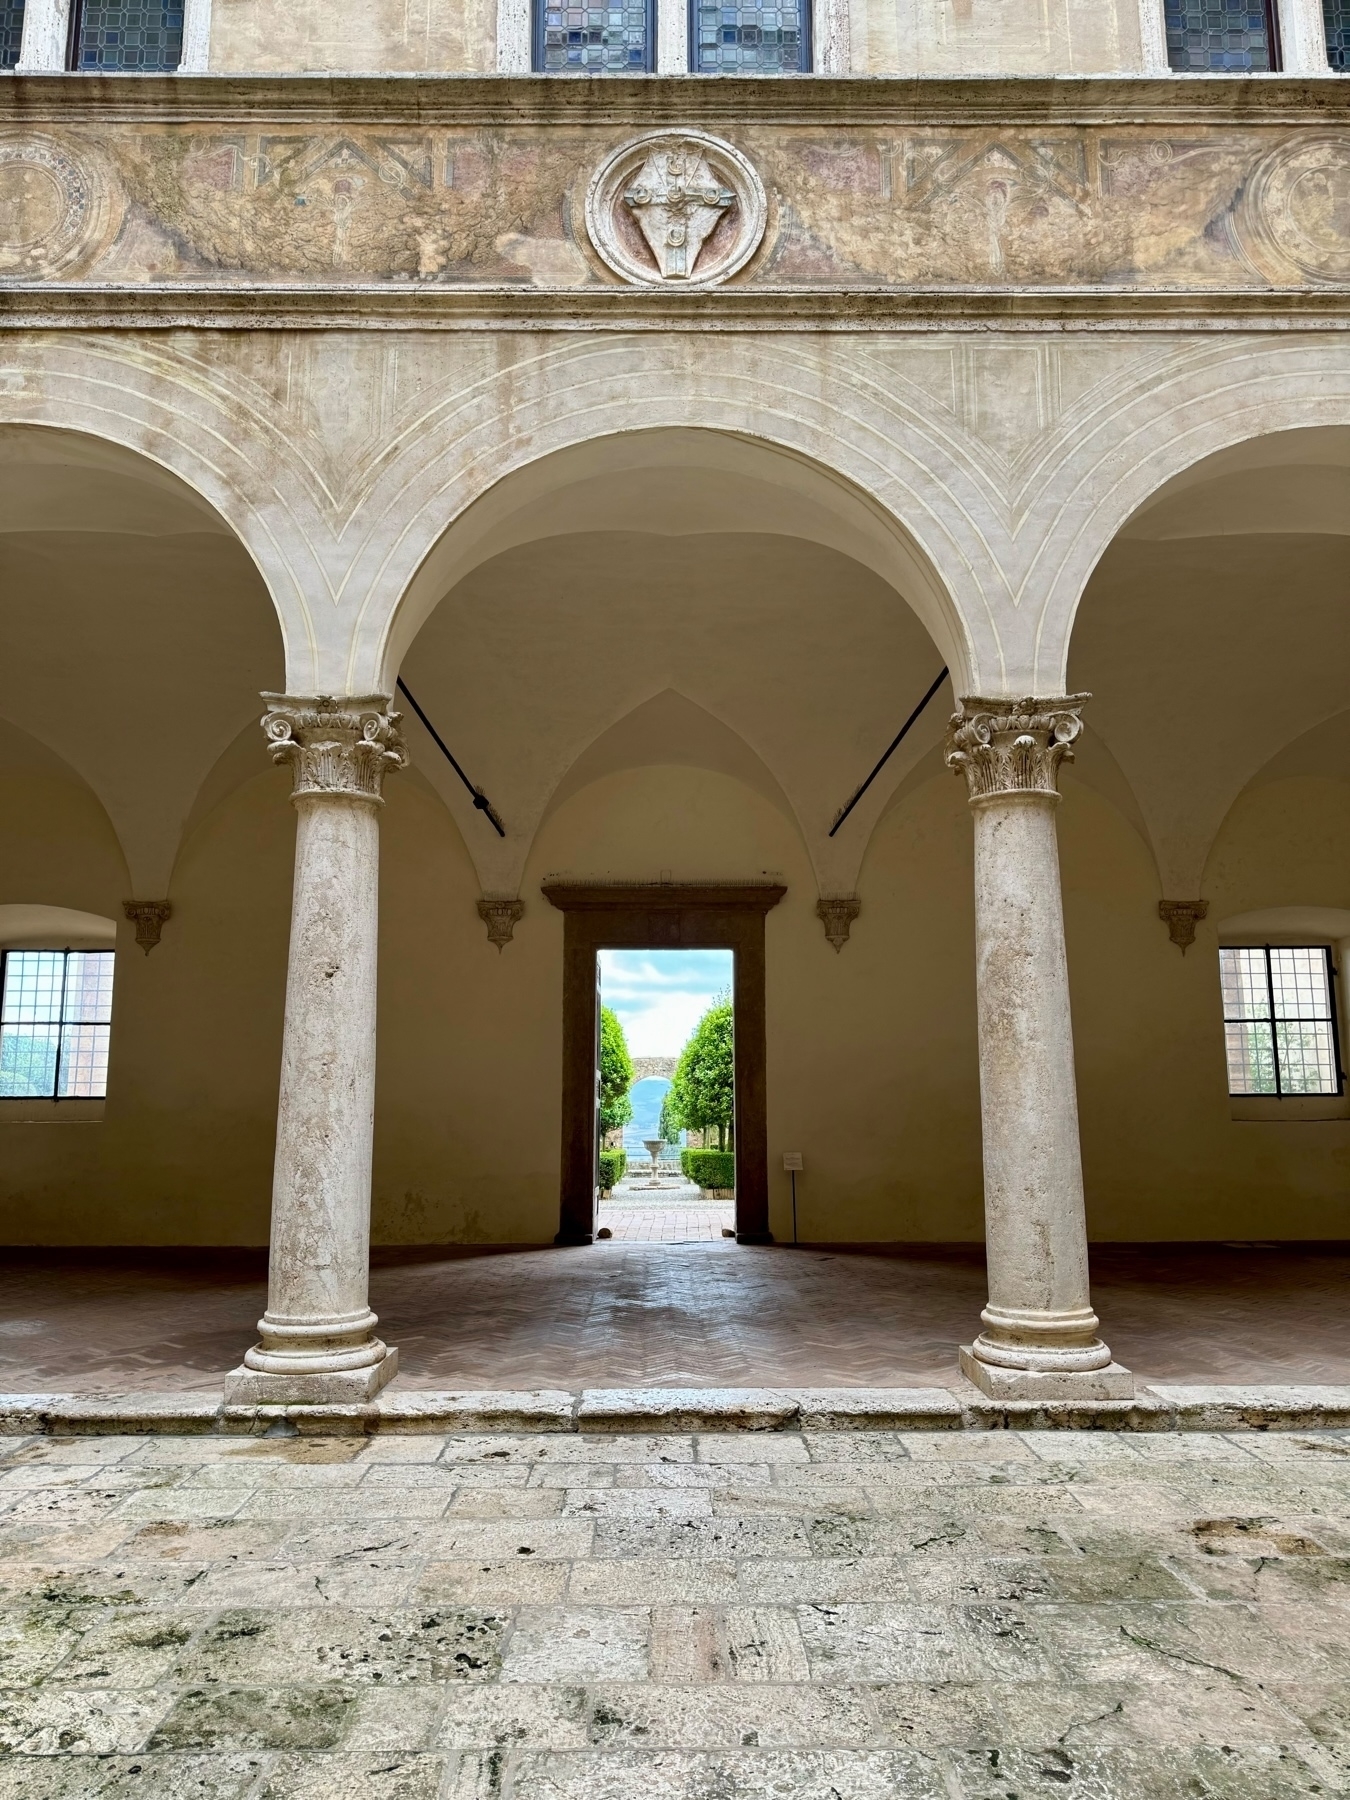 An arched walkway with three columns supporting the structure. Above the arches is a stone wall with faded frescoes and an ornamental carving. Beyond the doorway at the center is a garden pathway lined with hedges leading to a distant view of a lake. 